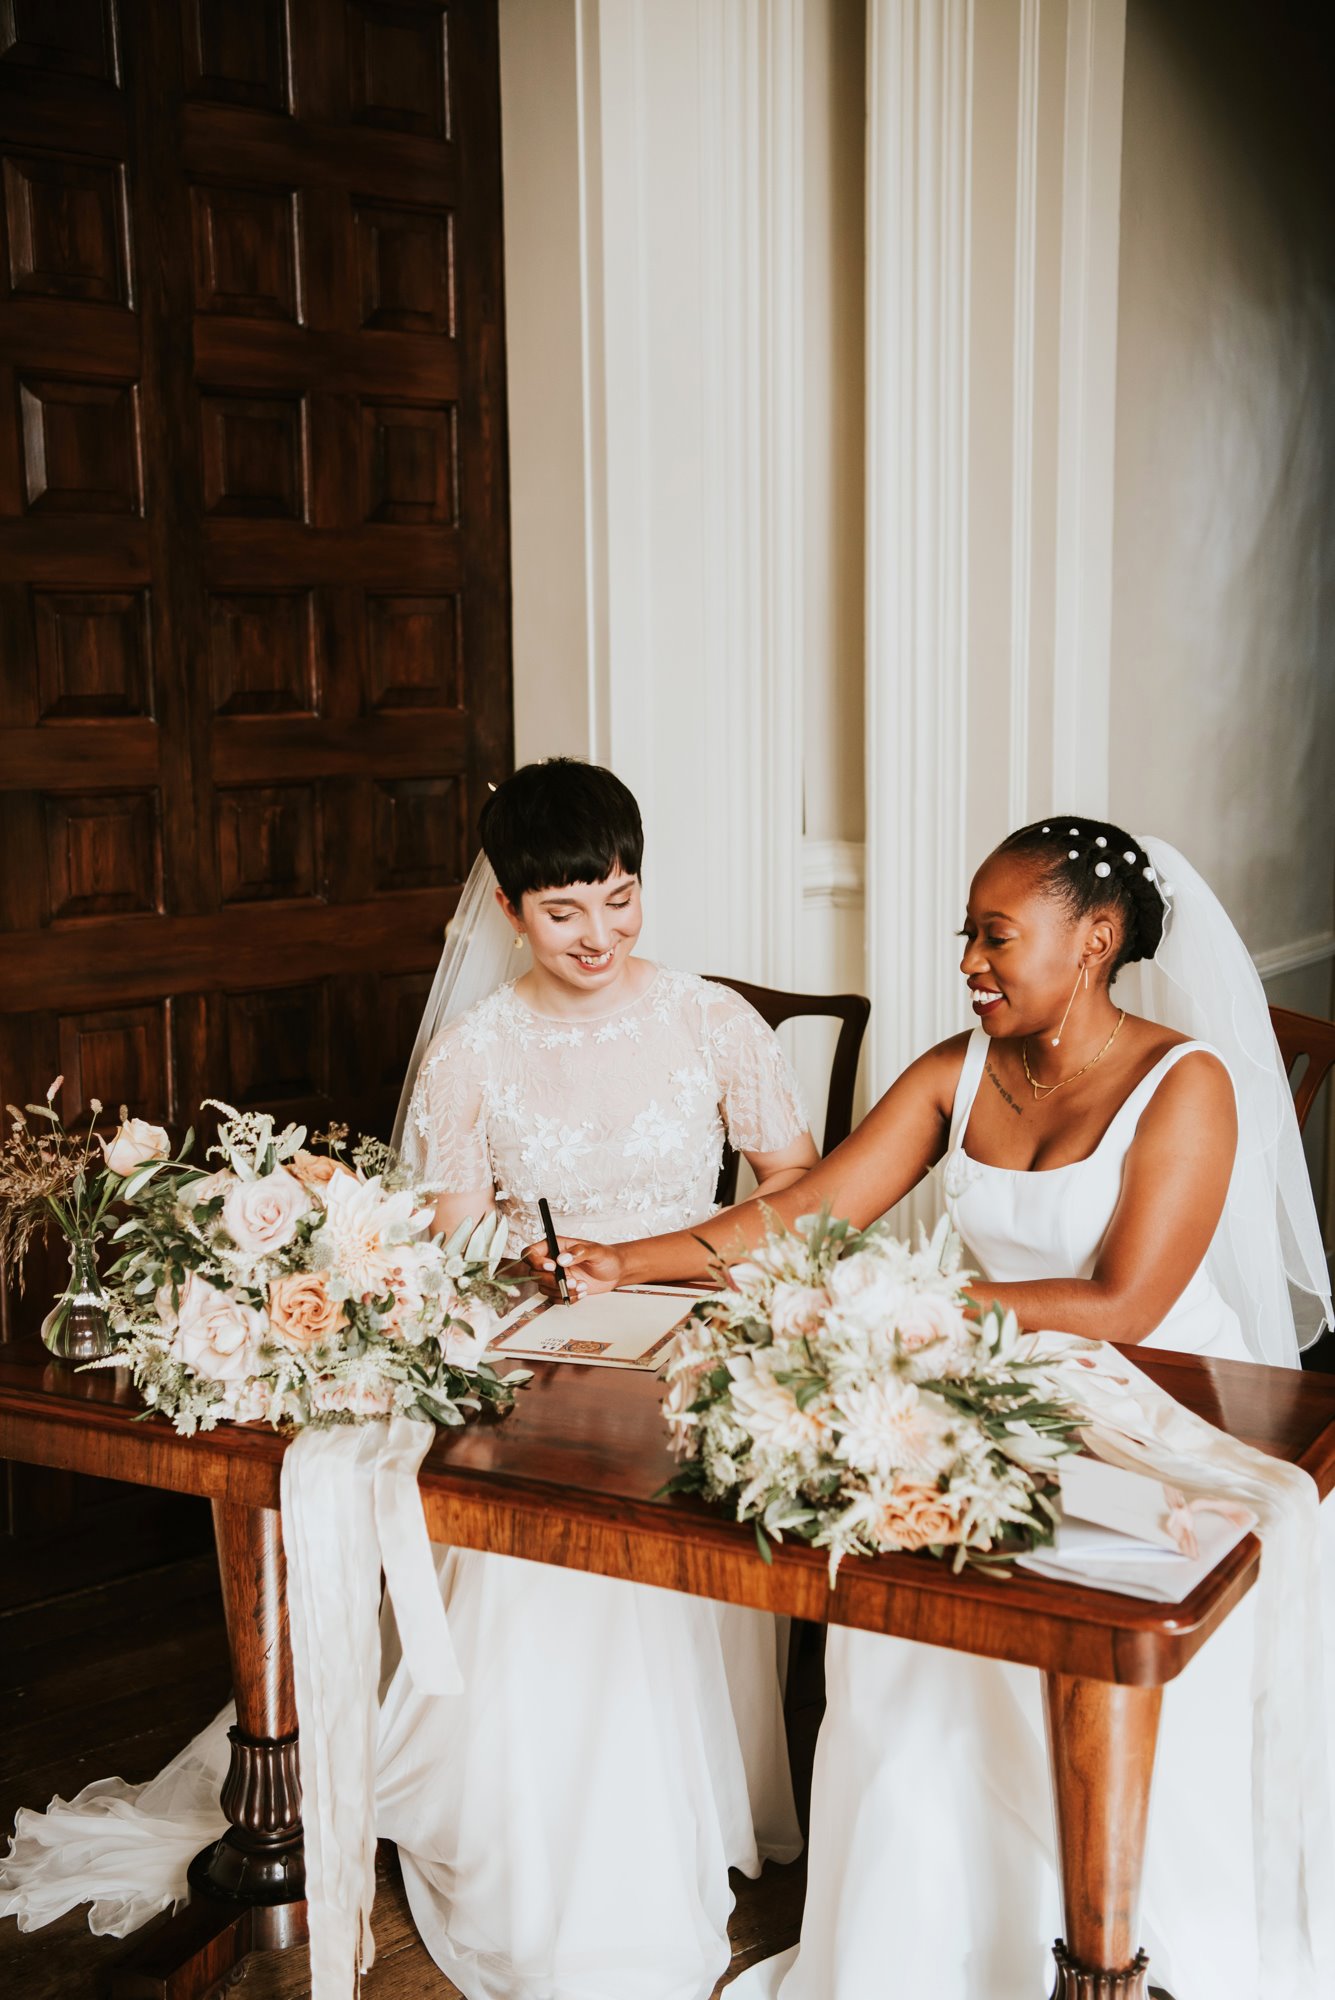 Two brides signing register after their wedding ceremony in stately home in Gloucestershire 